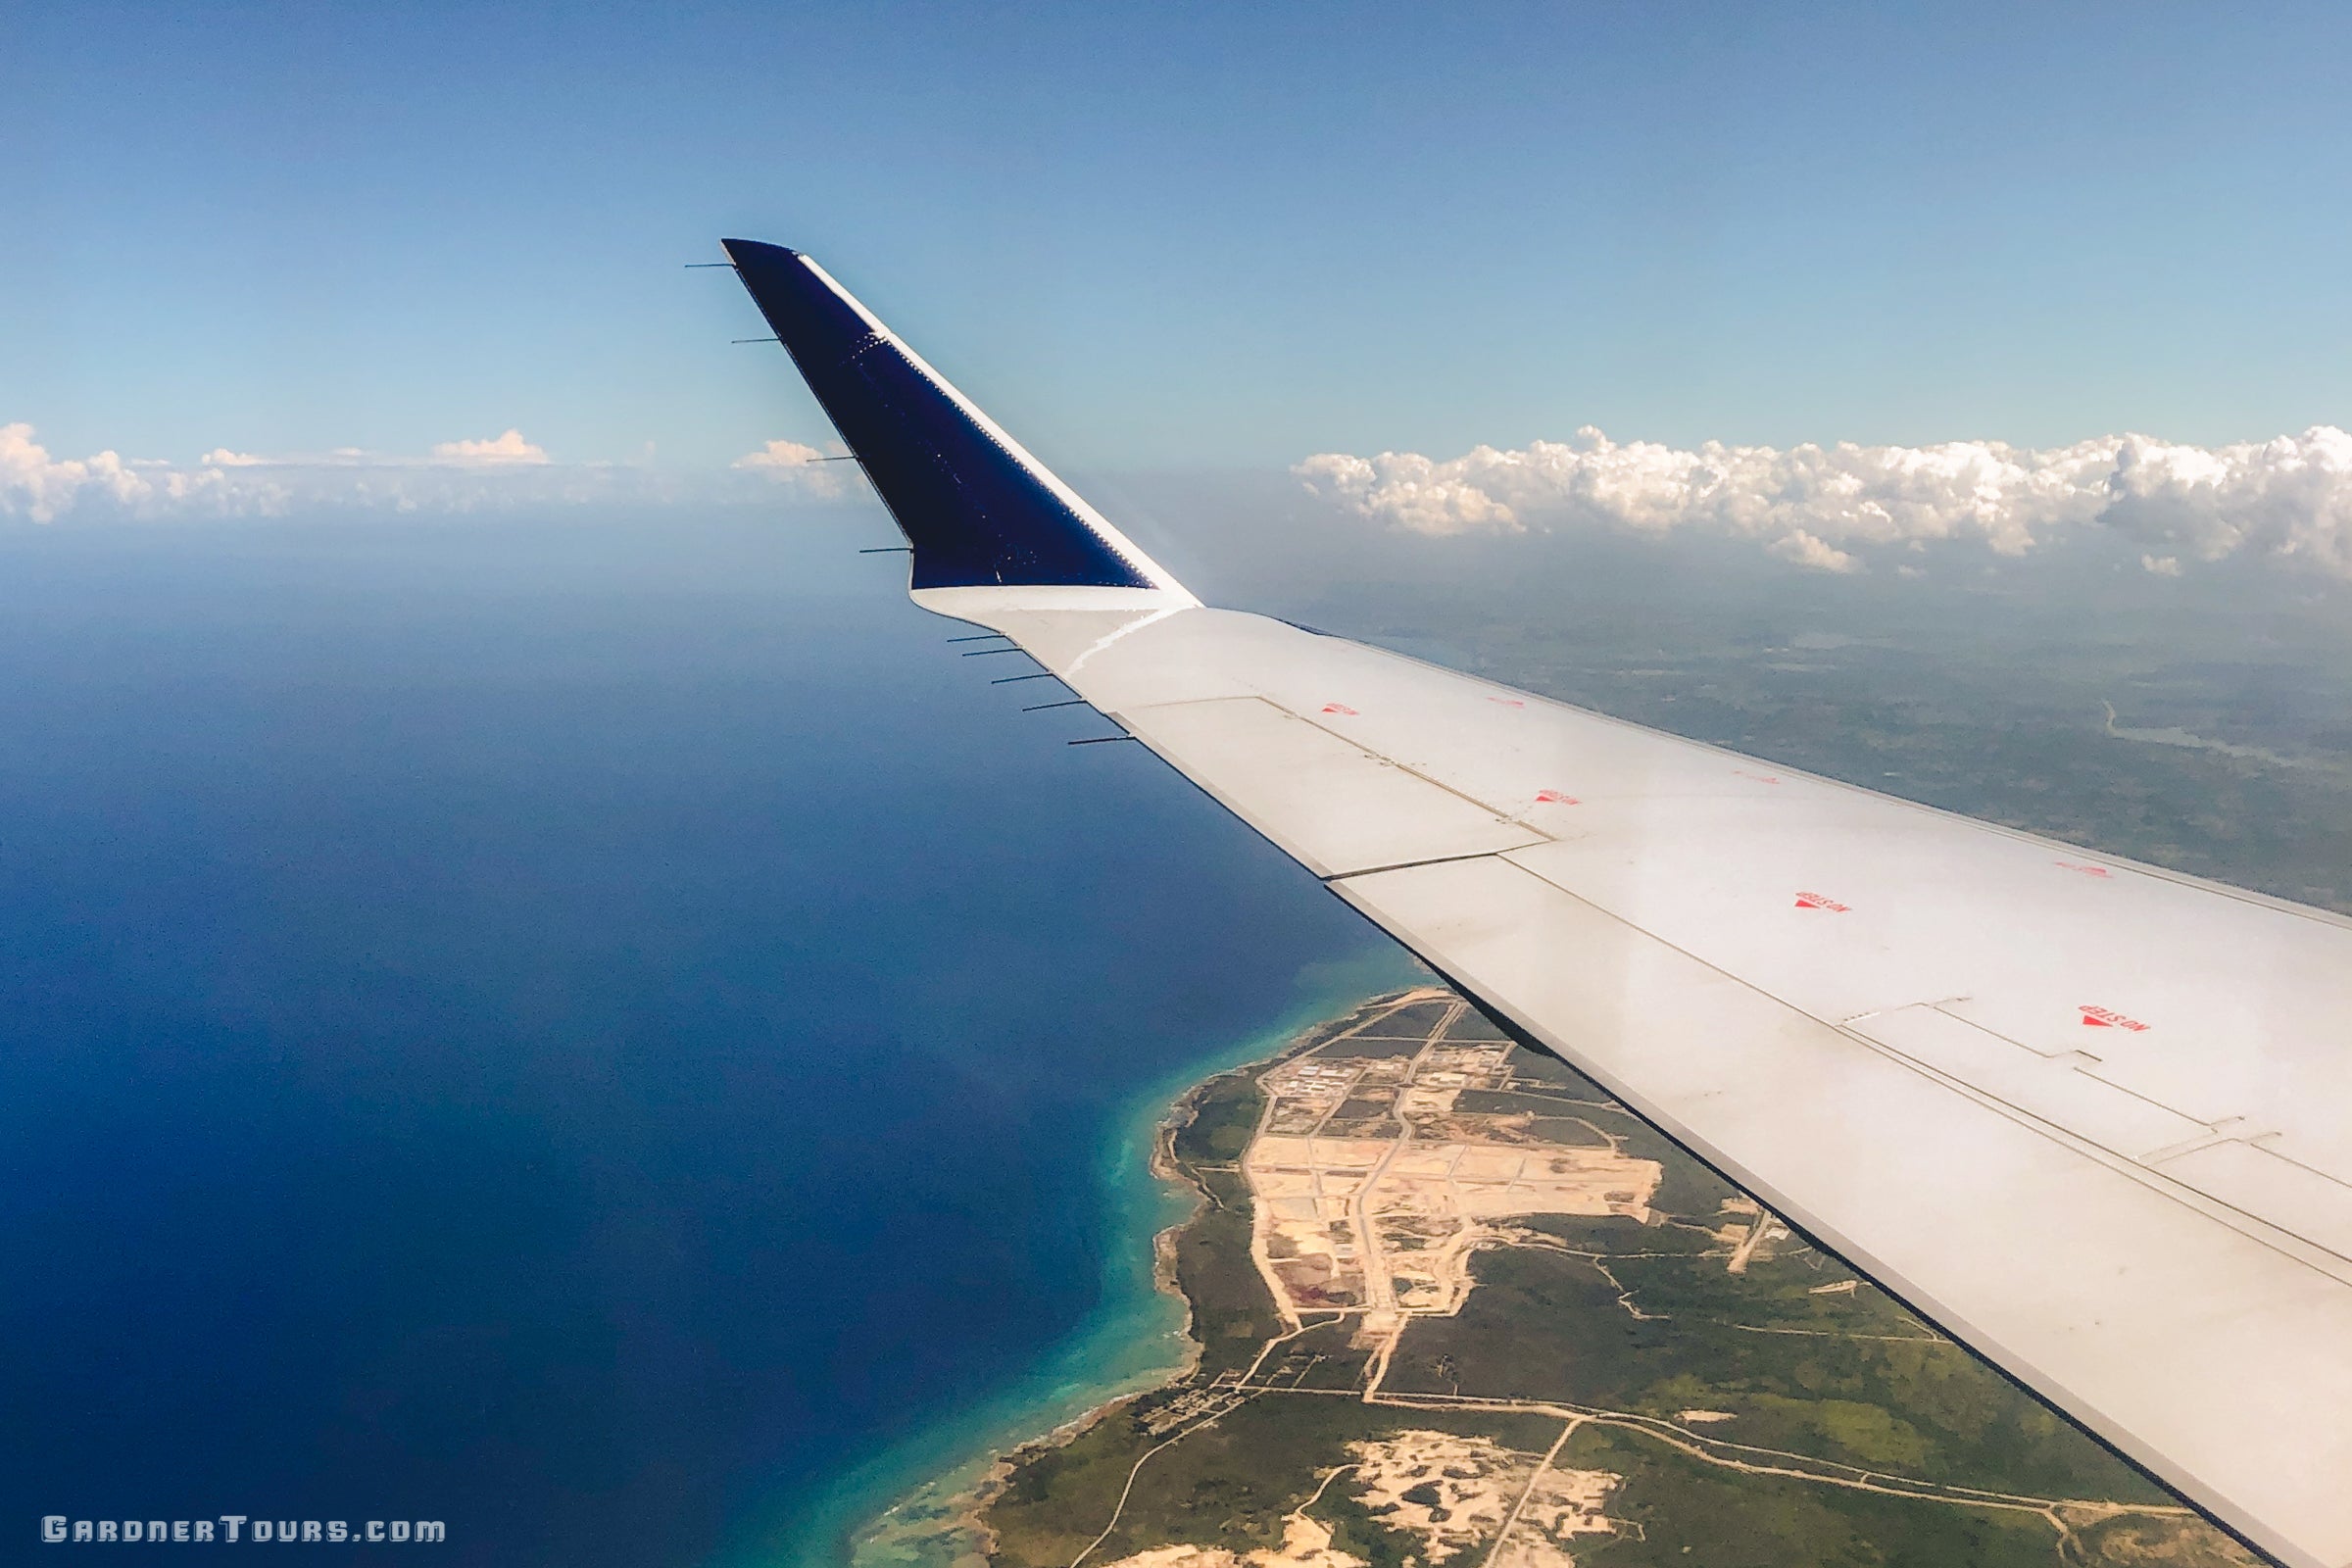 Gardner Tours Airplane Arriving over Blue Waters and Lush Lands in Havana, Cuba